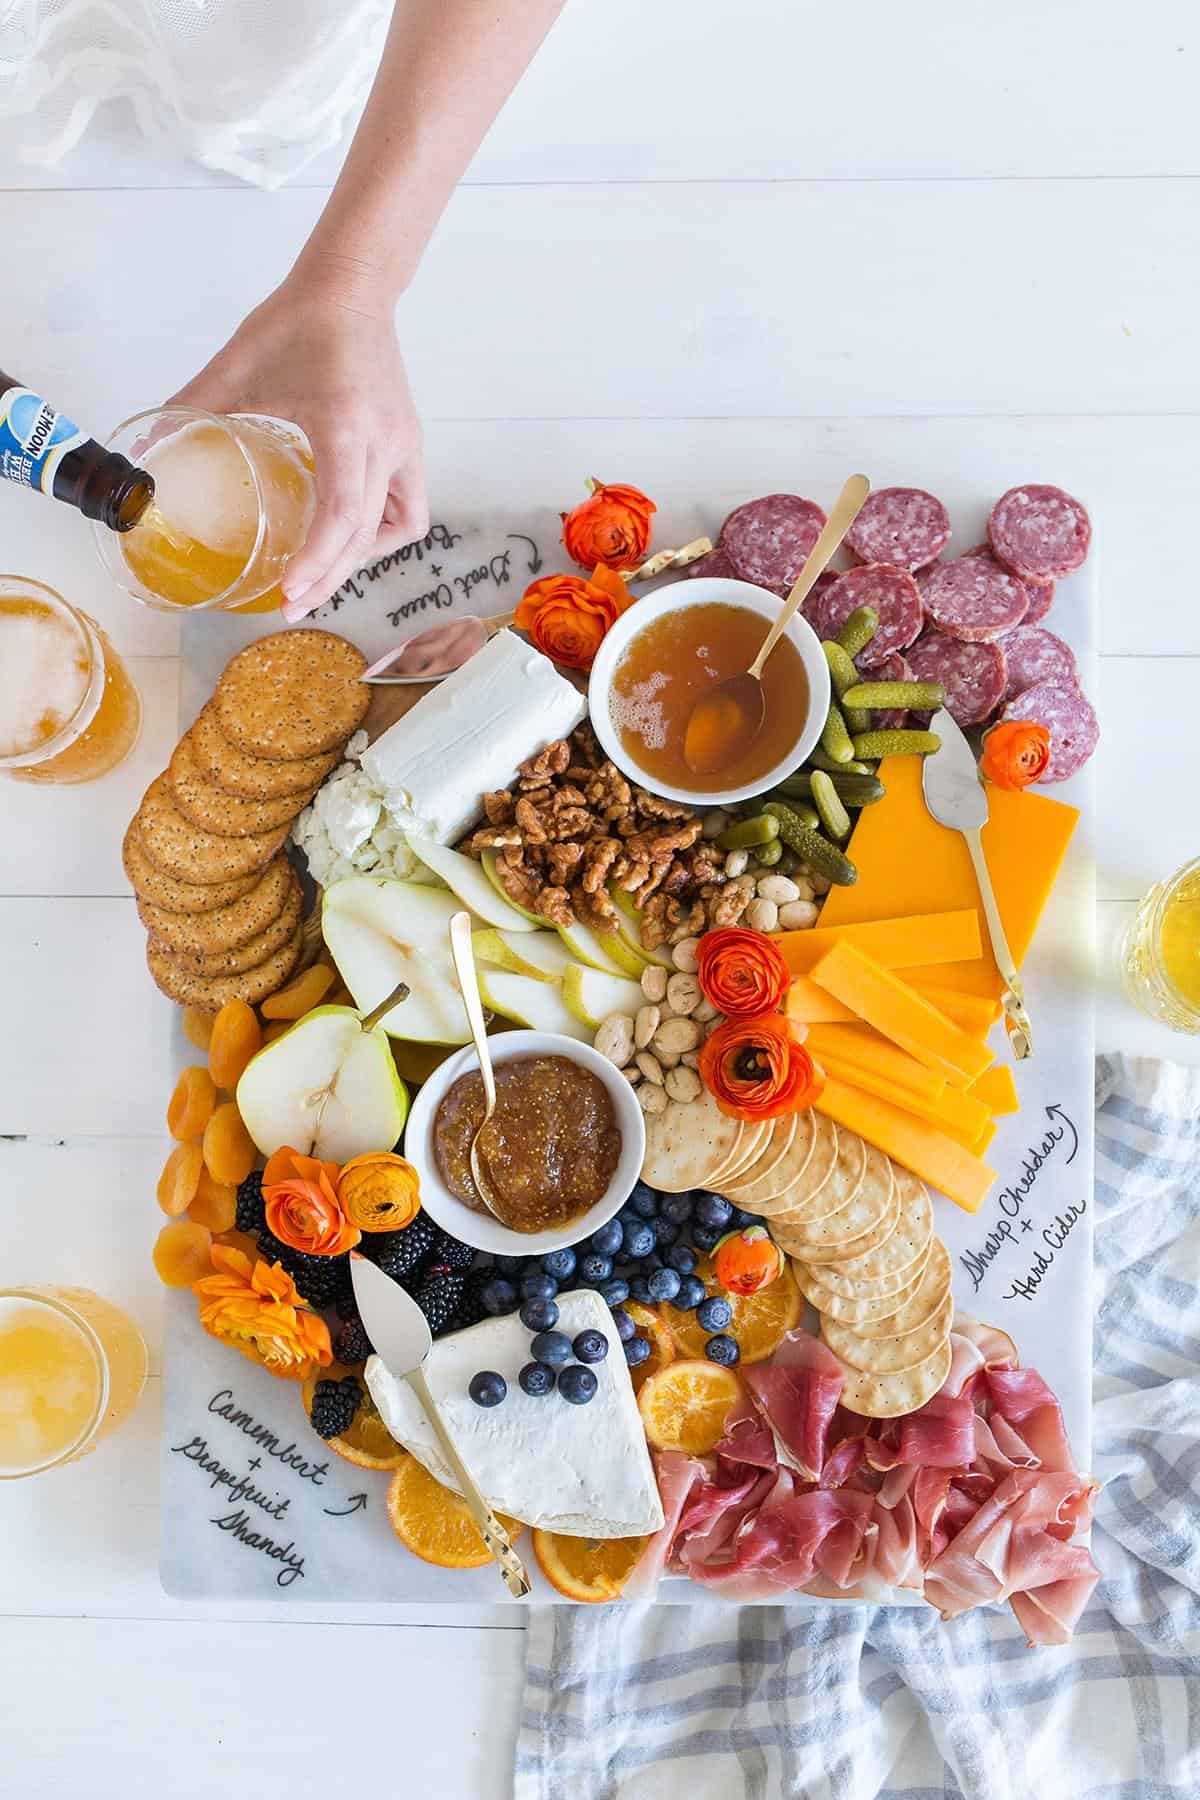 Looking for some amazing charcuterie board ideas to wow your guests on your next holiday parties? Learn how to make a charcuterie board plus get a list of the best cheese boards perfect for a crowd! #appetizers | simple charcuterie board | easy charcuterie board | cheap charcuterie board | food platter | entertaining | fall charcuterie board | thanksgiving charcuterie board | Image via Freut Cake